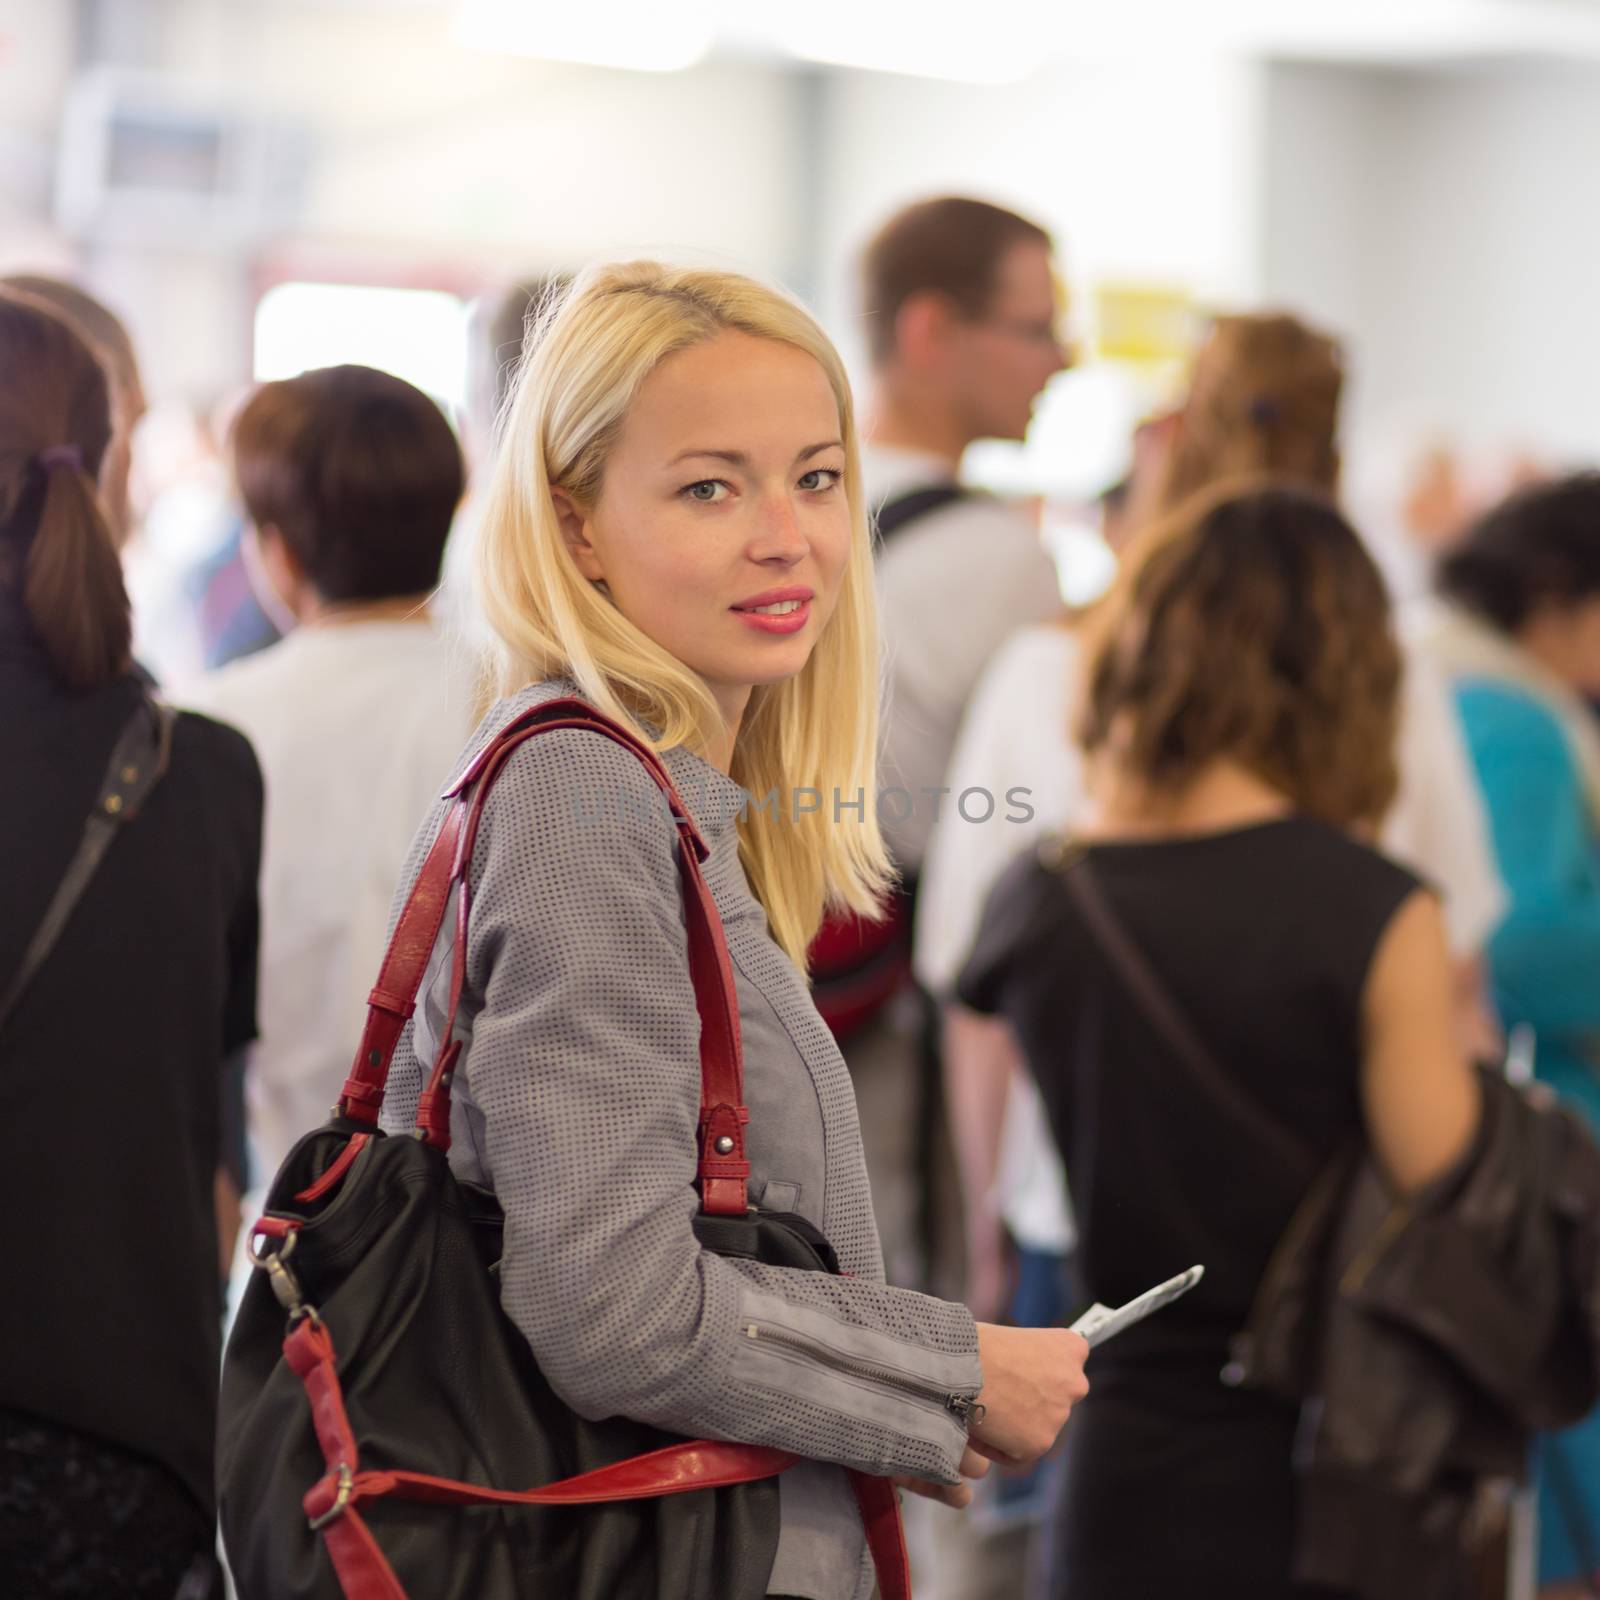 Young blond caucsian woman waiting in line. by kasto